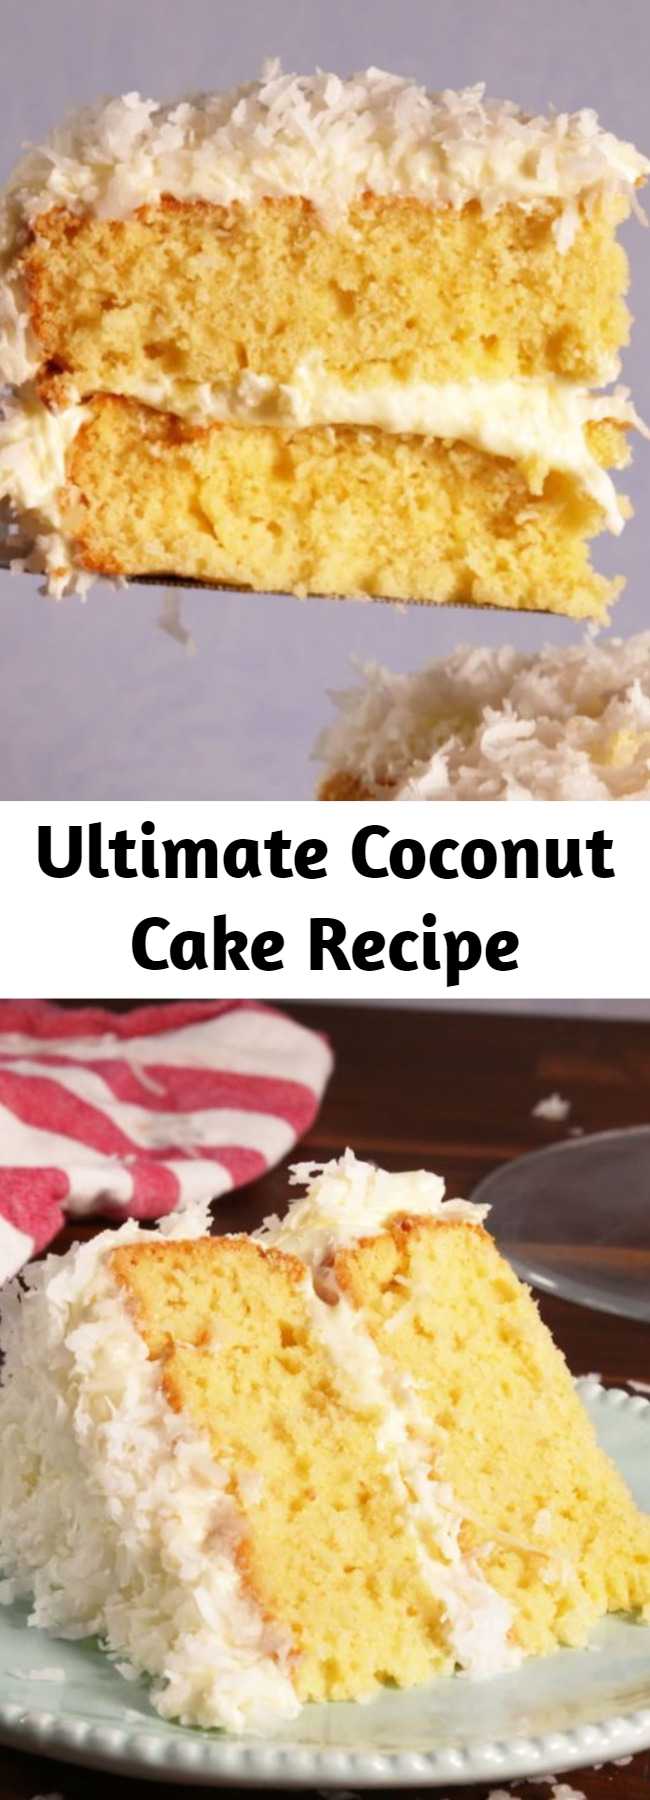 Ultimate Coconut Cake Recipe - Check out this recipe for the absolute best coconut layer cake! This cake gets its amazing flavor from vanilla and almond extracts and, of course, shredded coconut.